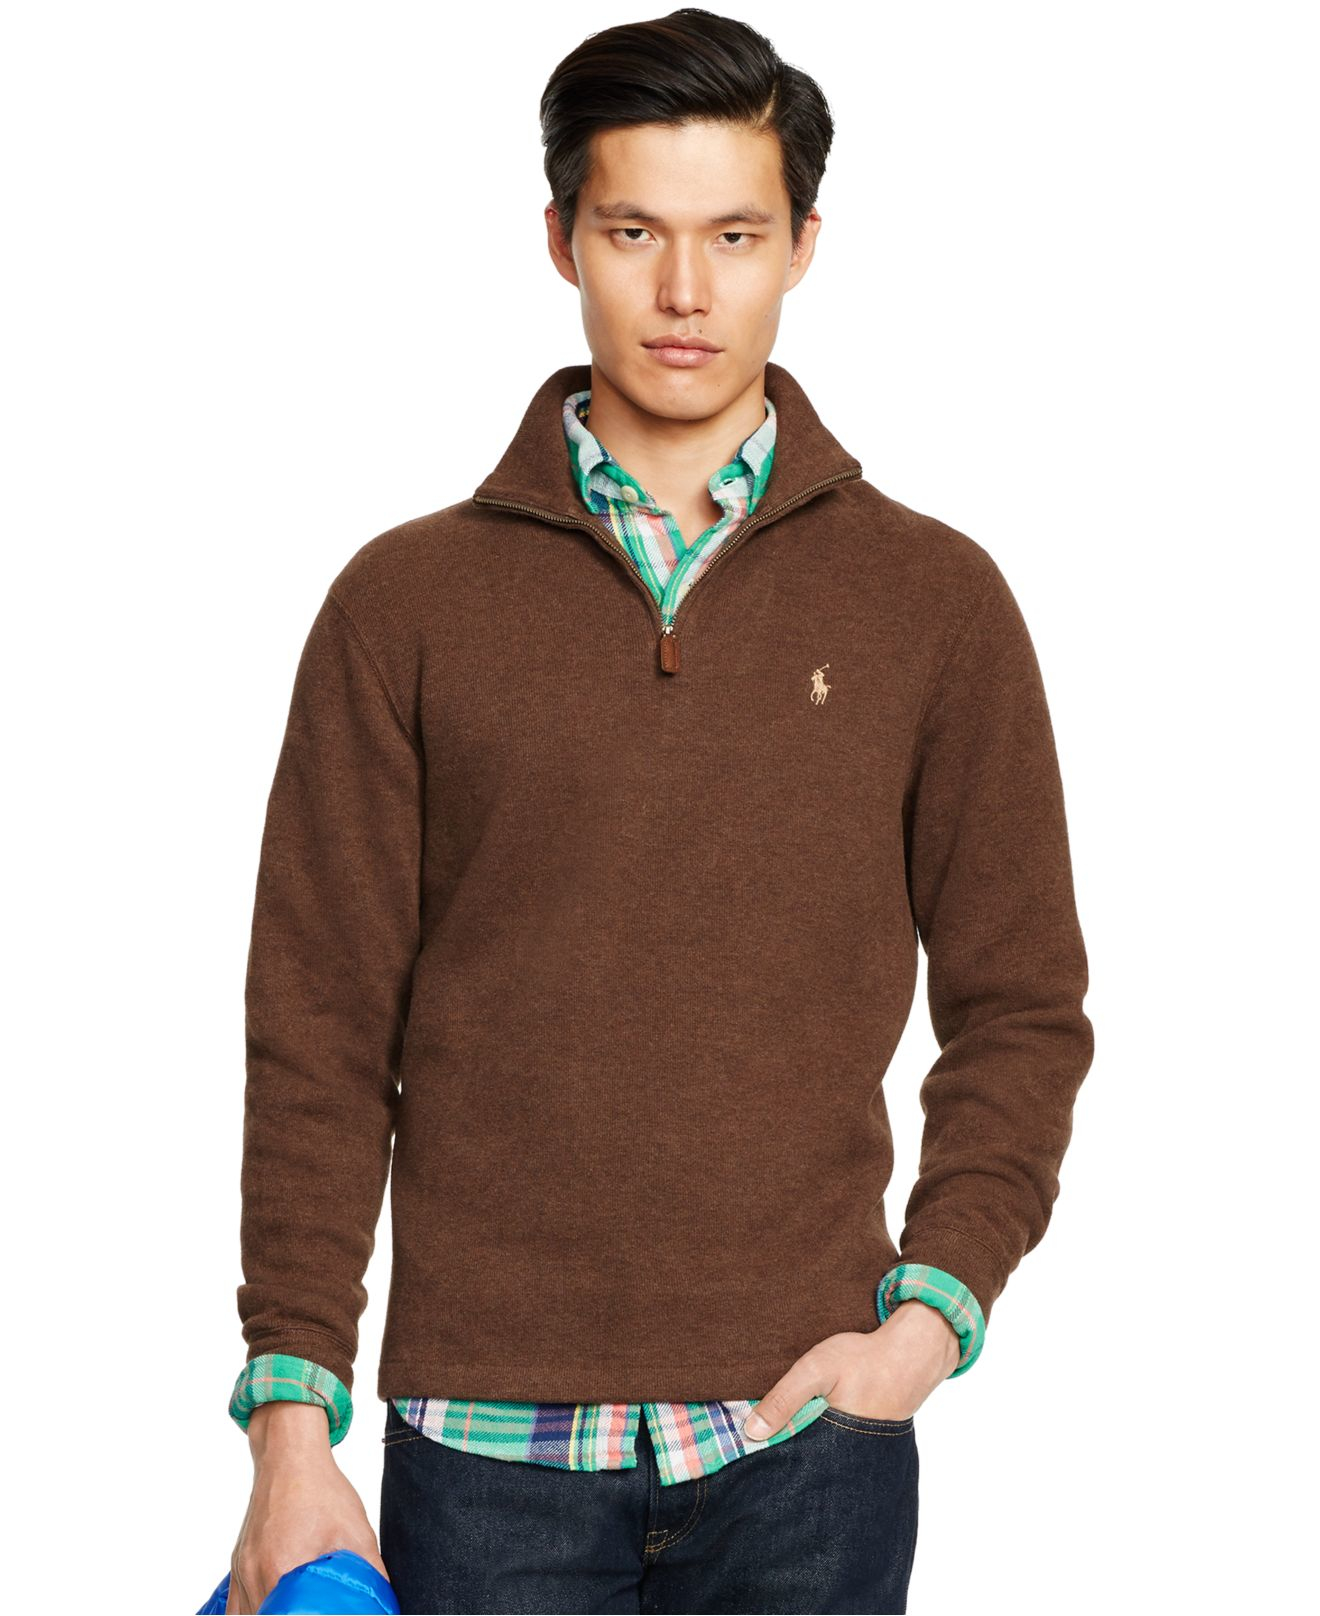 Lyst - Polo Ralph Lauren French-rib Half-zip Pullover in Brown for Men